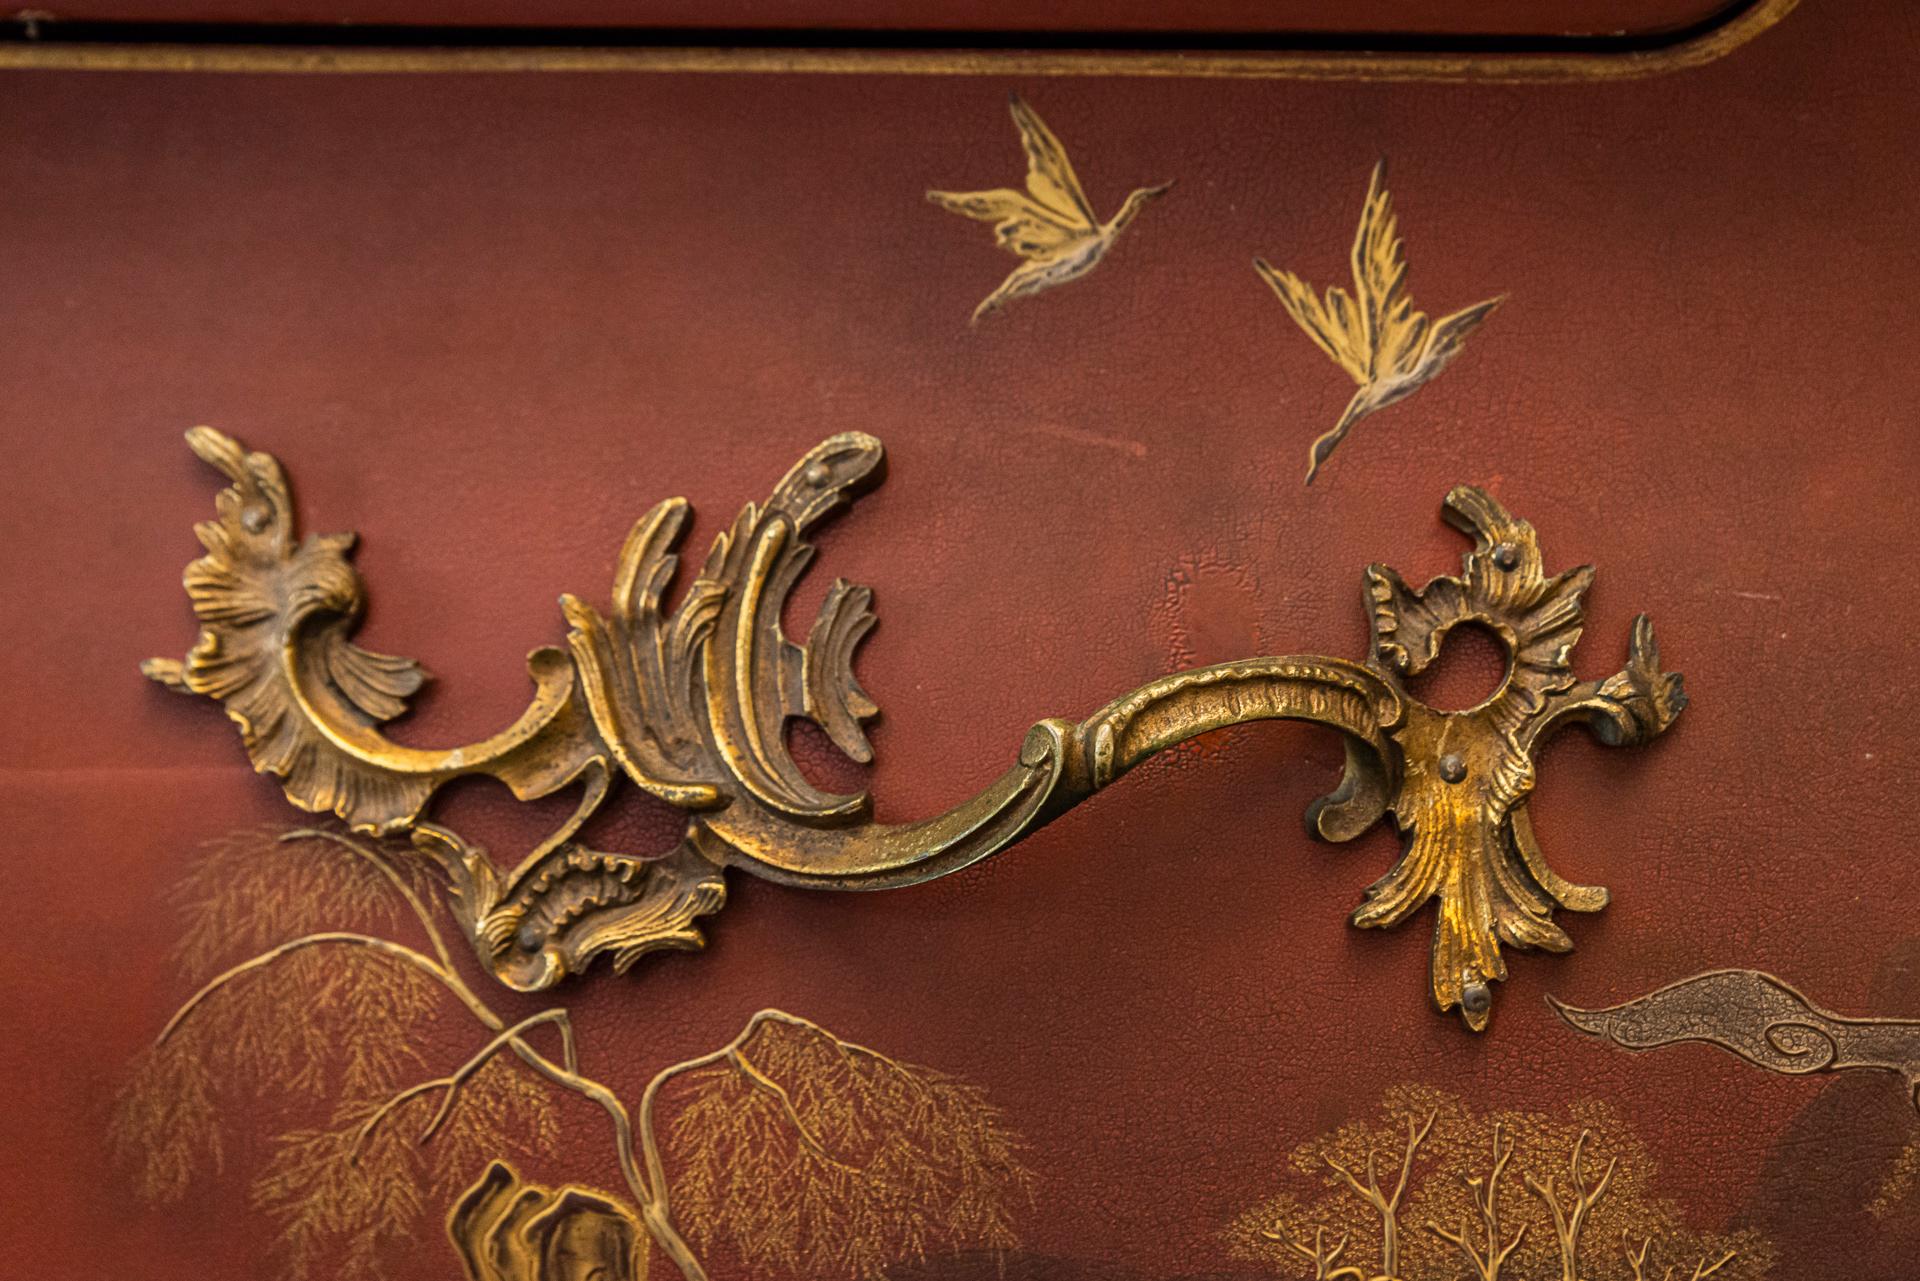 Maison Jansen, Sideboard in the style of Louis XV
Red lacquered decorated with chinoiseries,
Curved base with two drawers, decorated with fishing scenes,
Chiselled and gilt handles, feet, angles and keyholes,
Marble tabletop,
France, circa